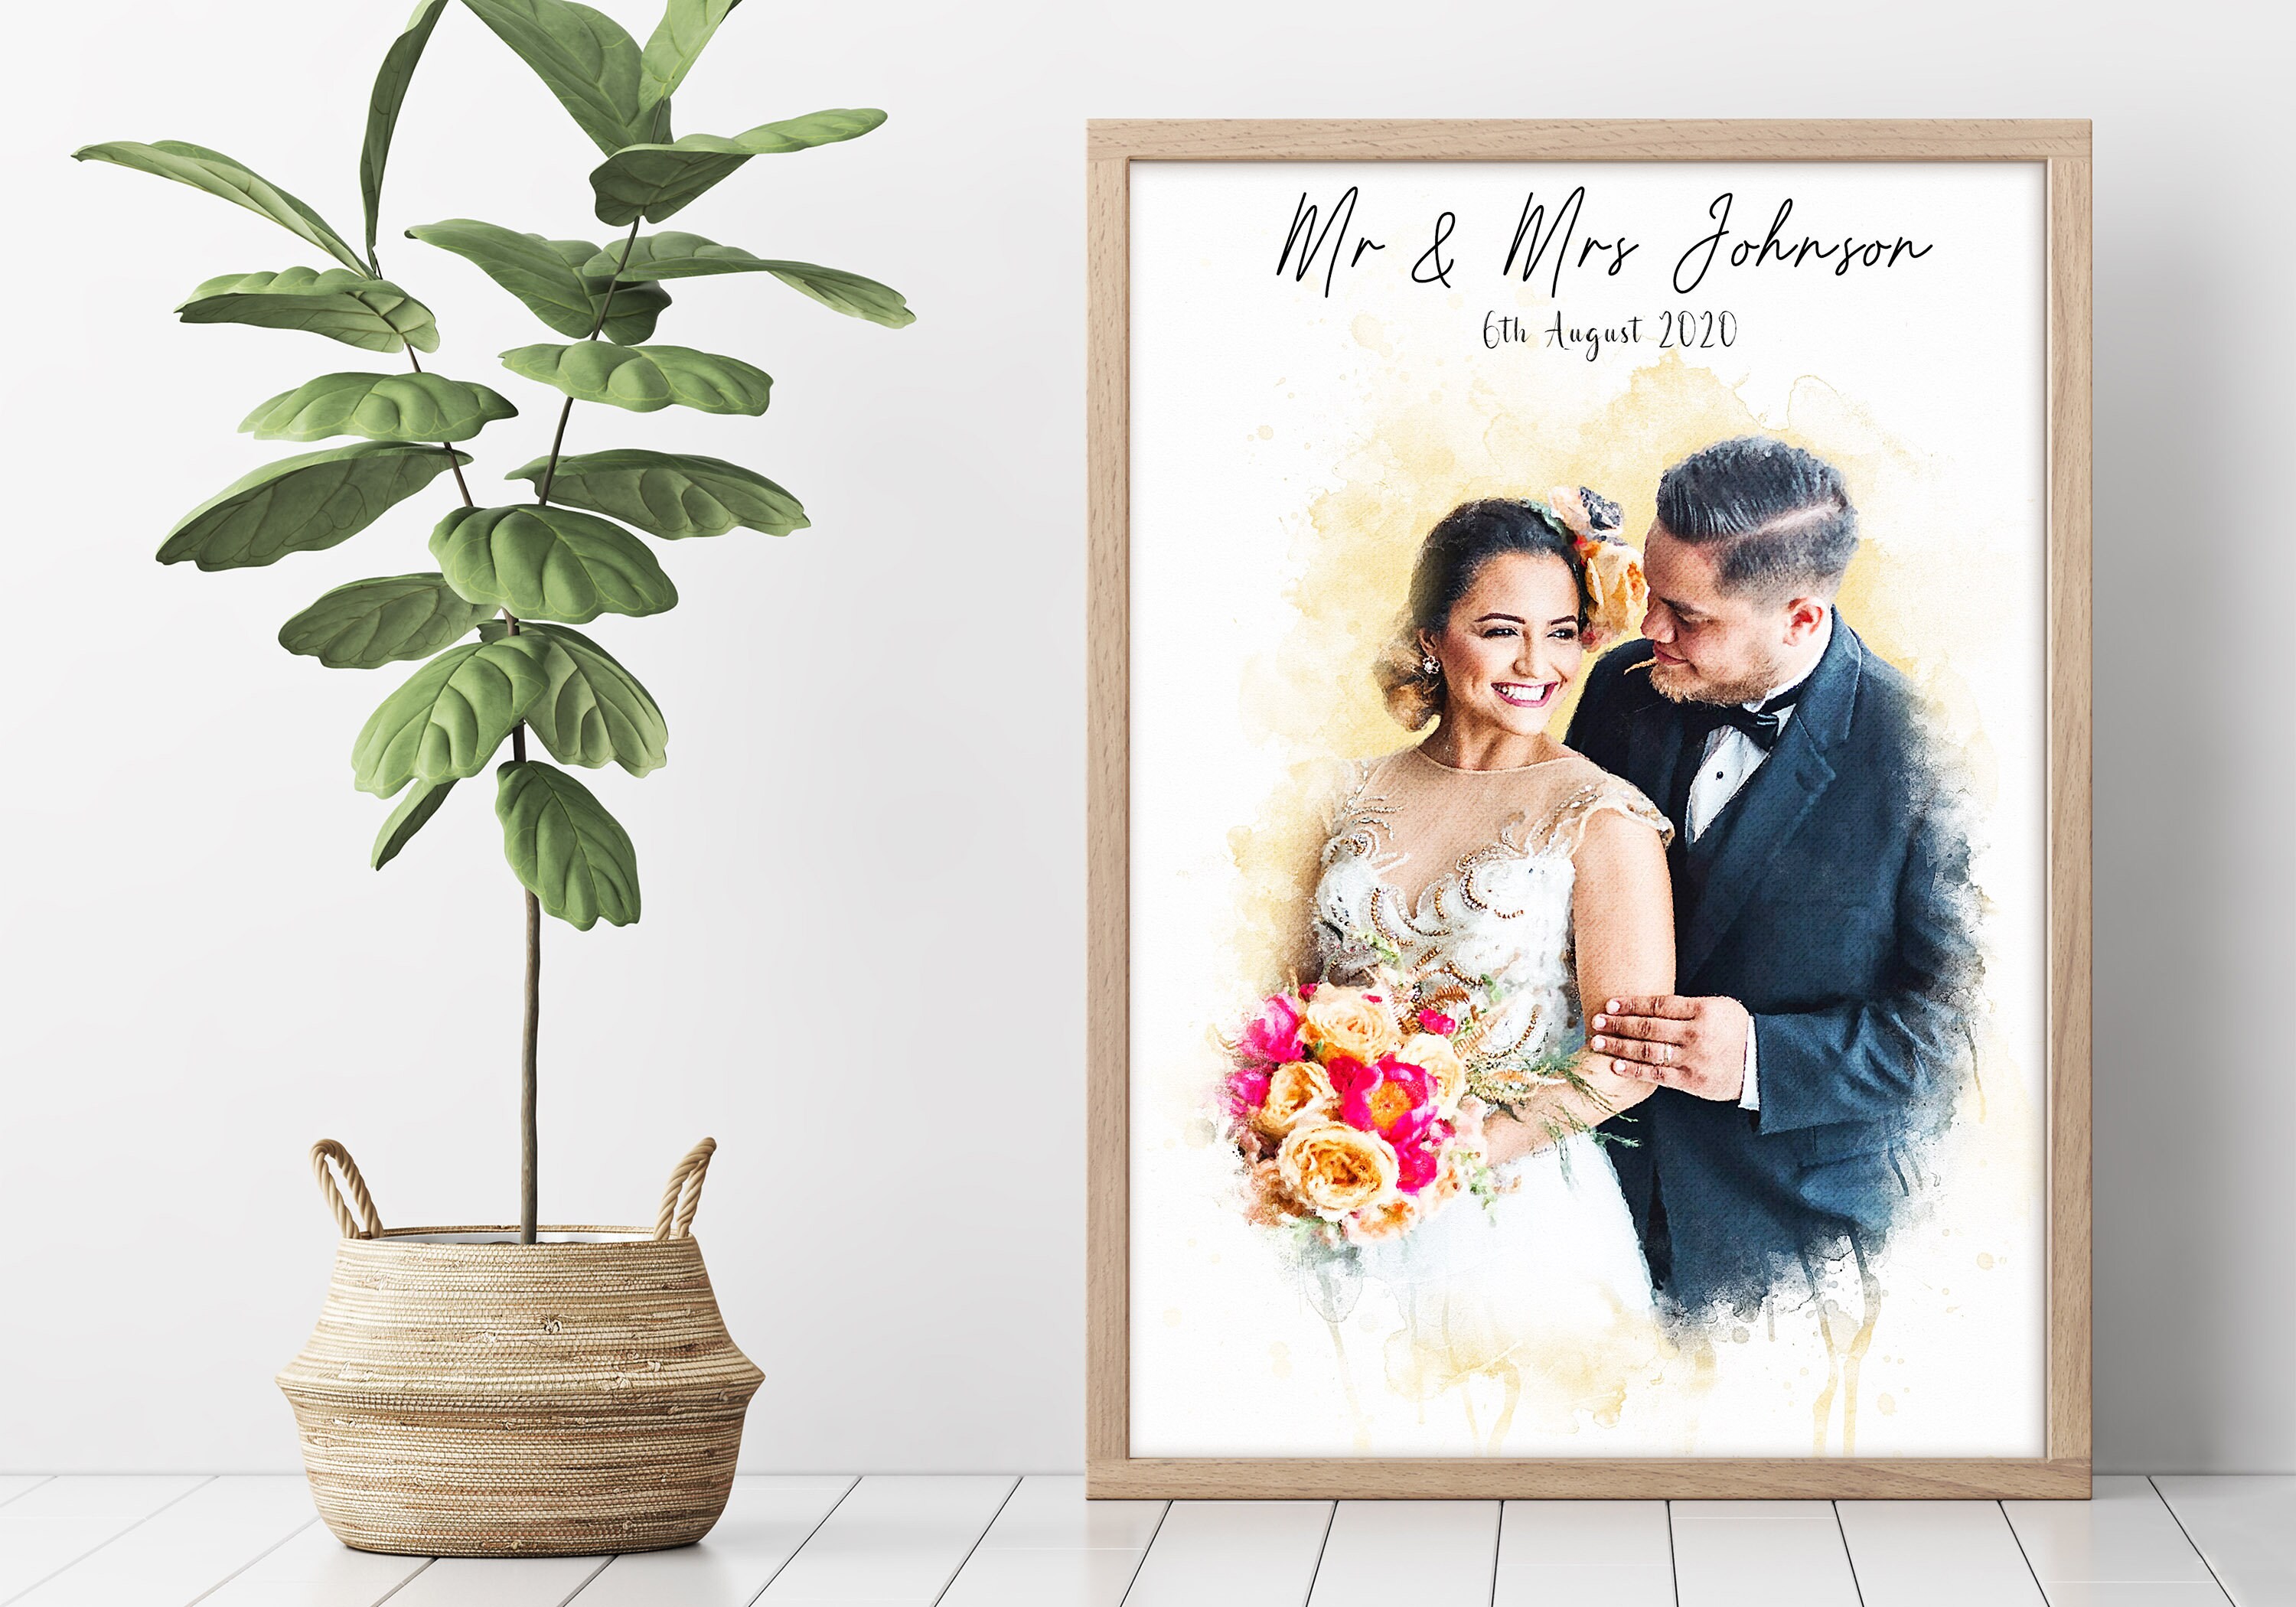 Wedding Invitations Cards Bride and Groom Scroll Invitations for Engagement  Bridal Shower Anniversary Marriage Mr Mrs Invites (S1092)